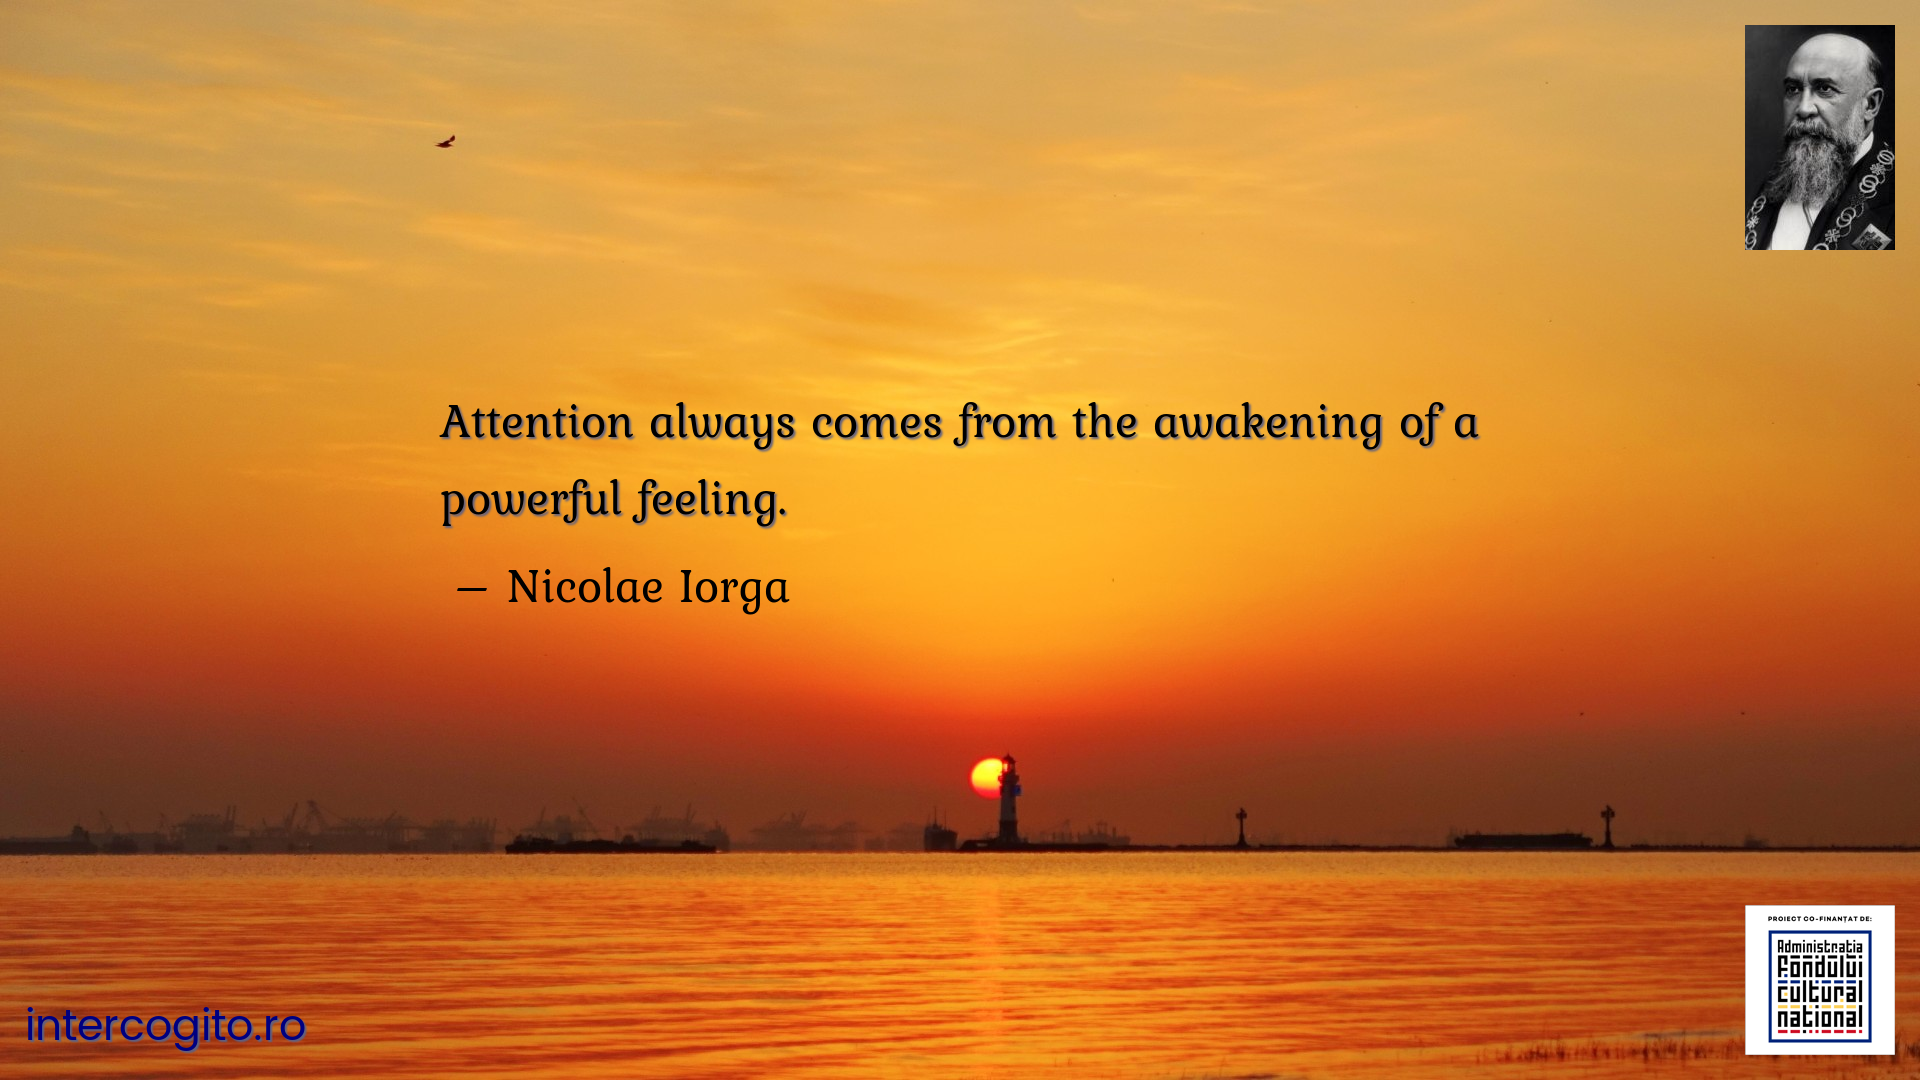 Attention always comes from the awakening of a powerful feeling.